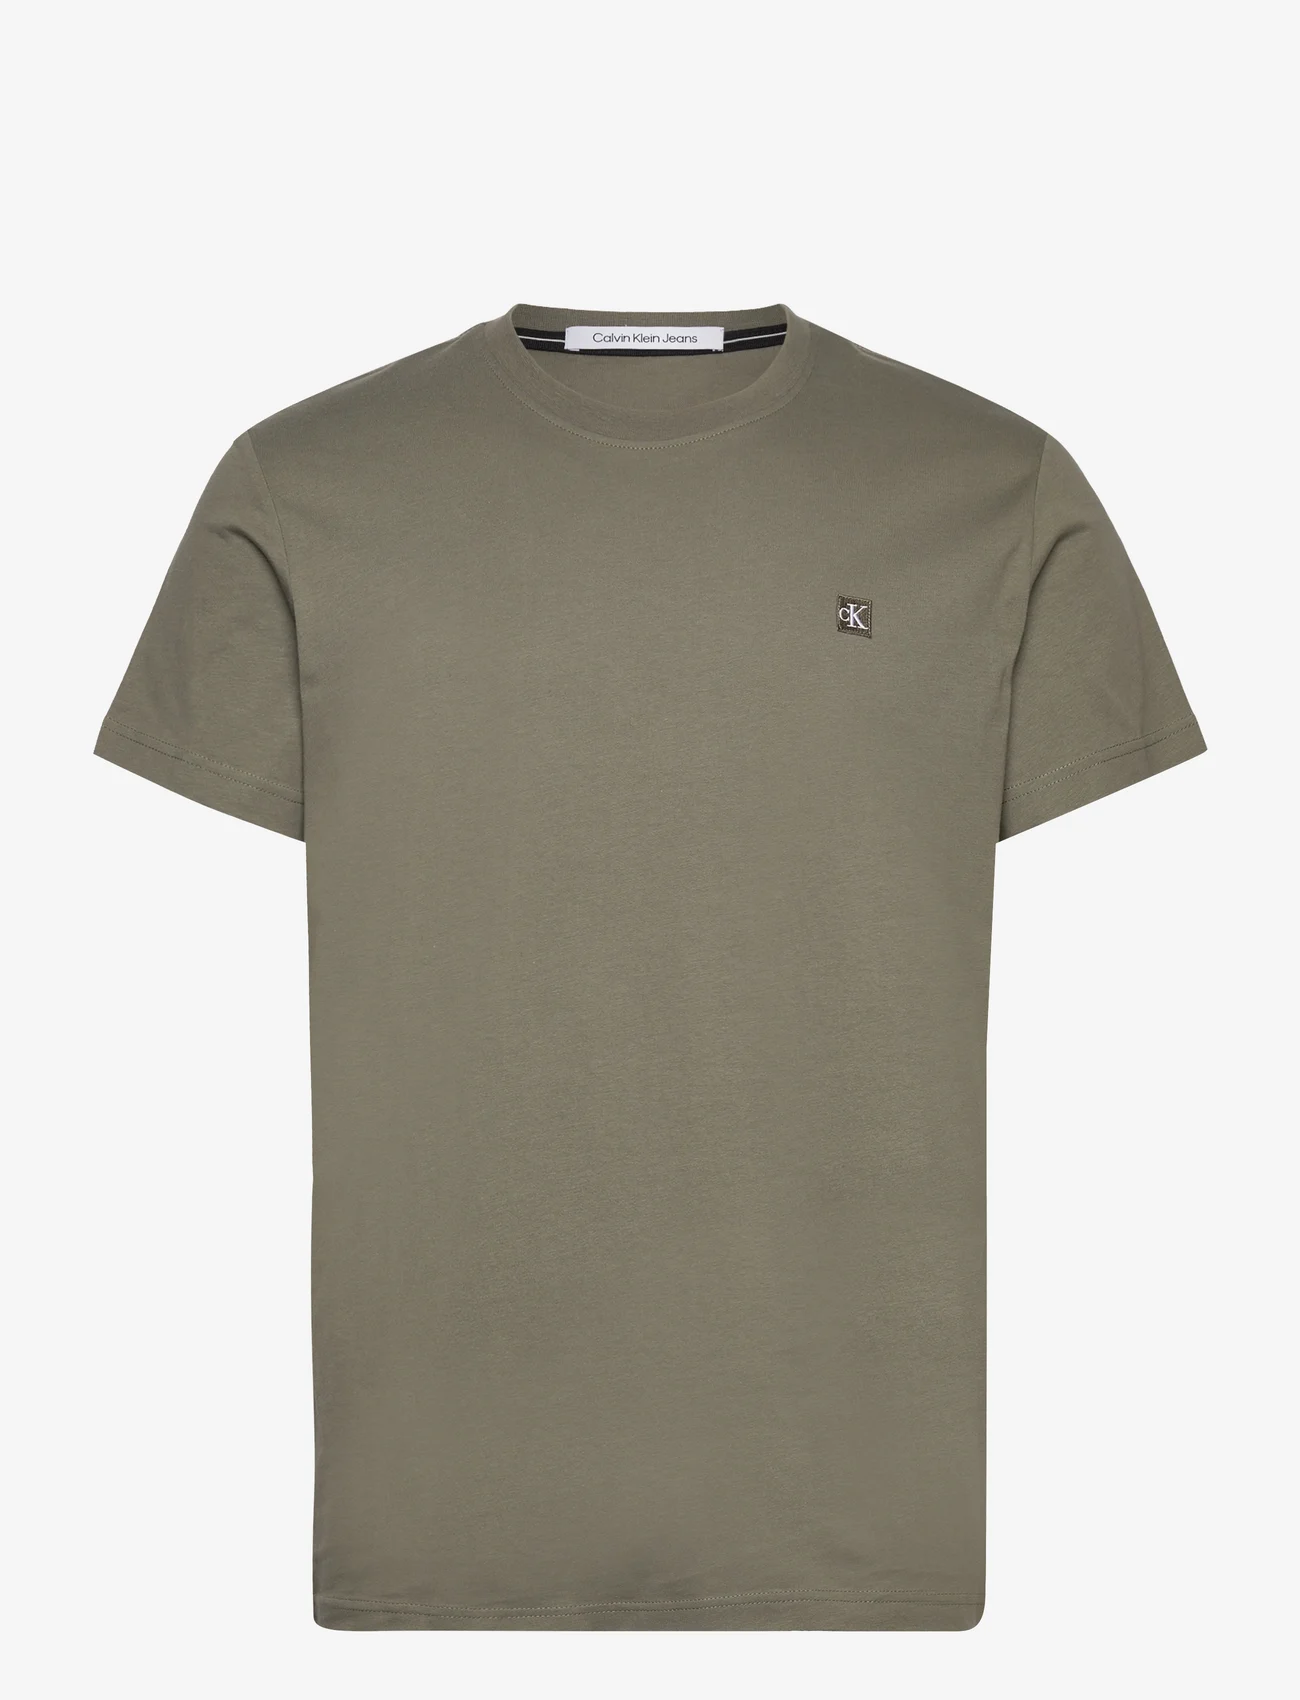 Calvin Klein Jeans - CK EMBRO BADGE TEE - basic t-shirts - dusty olive - 0